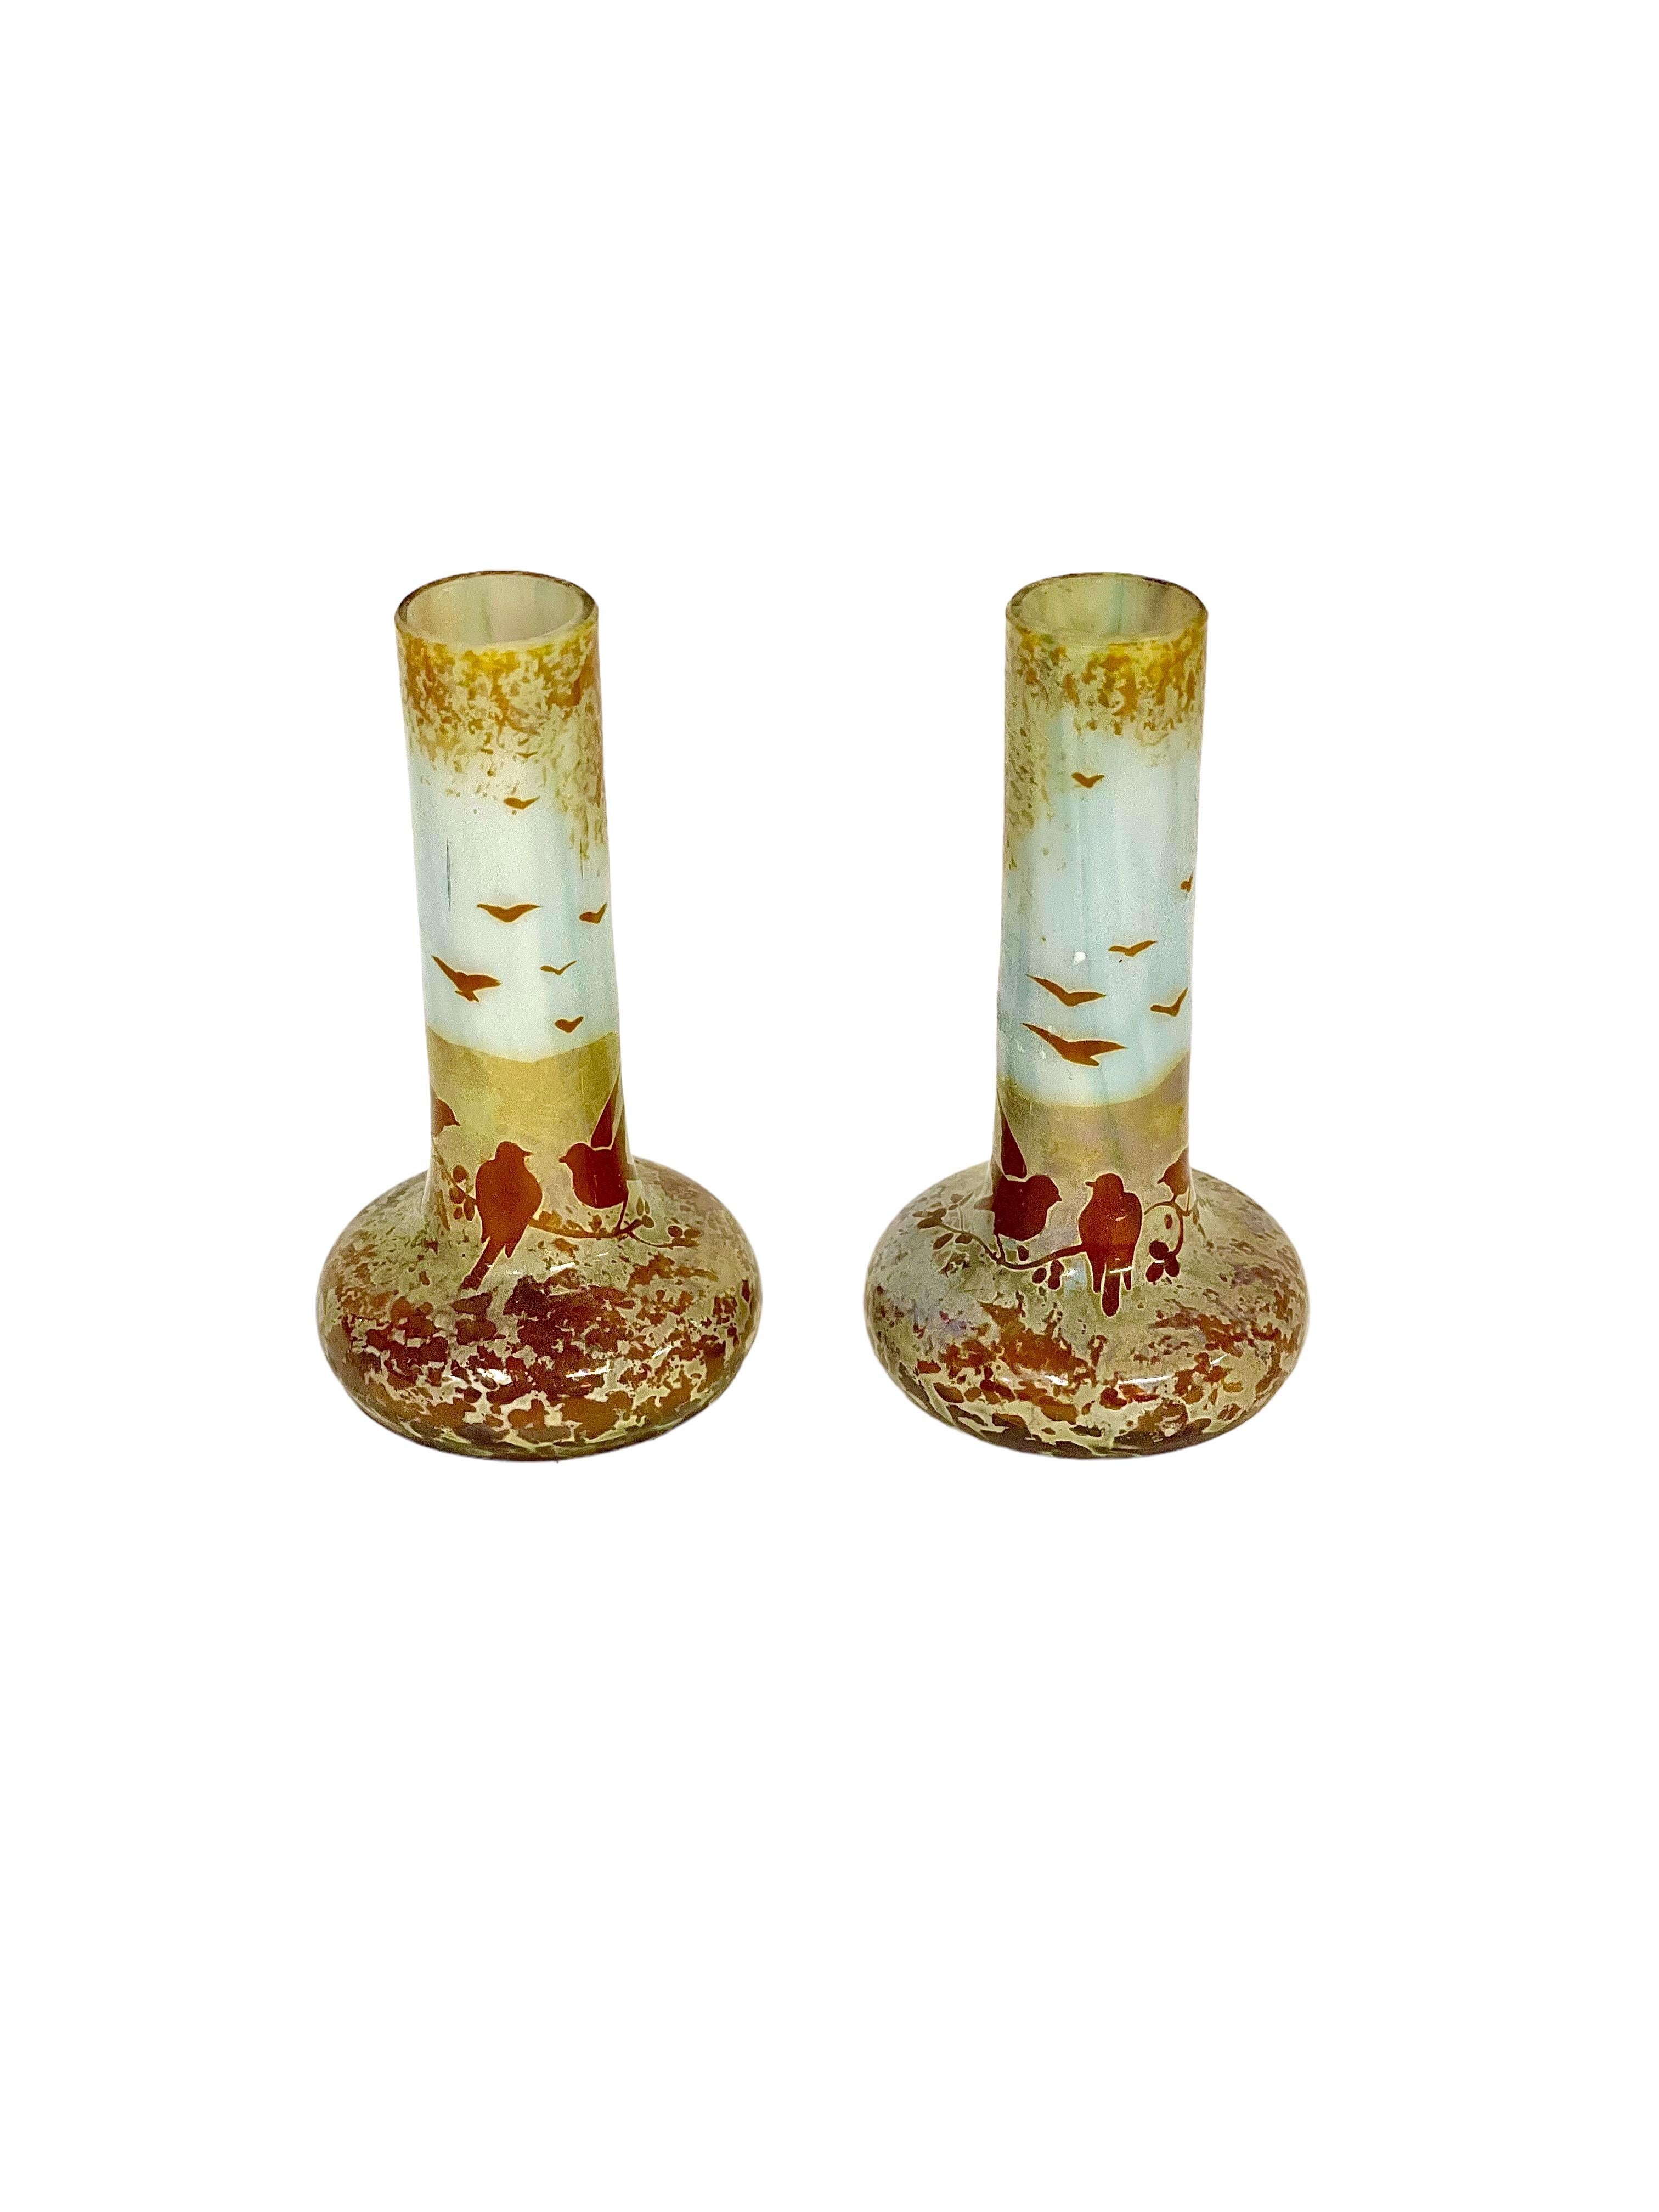 A charming and diminutive pair of soliflores, or stem vases, in muted shades of white, gold and terracotta, depicting a gathering of birds on a branch, and in the sky. These tiny tubular vases, designed to each hold a single bloom, are created from